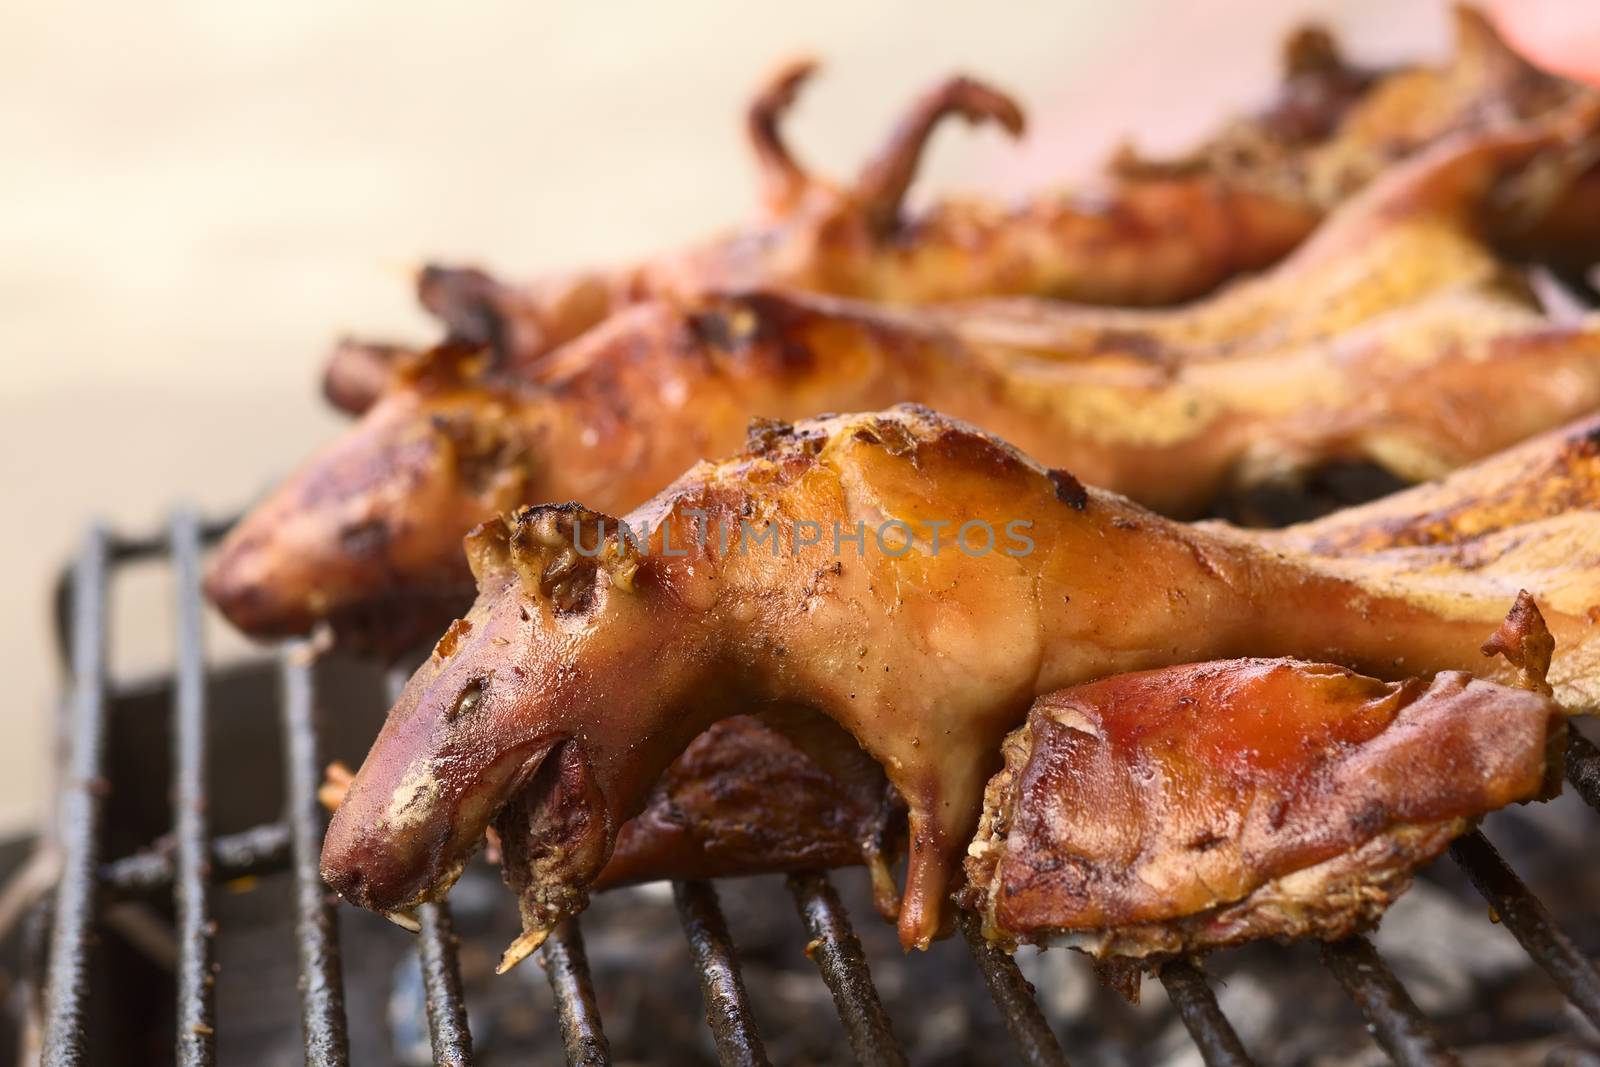 BANOS, ECUADOR - FEBRUARY 28, 2014: Guinea pigs being barbecued for sale on Ambato Street at the market hall on February 28, 2014 in Banos, Ecuador. In Ecuador, guinea pig (or cuy in Spanish) is considered a delicacy, and is usually very expensive.